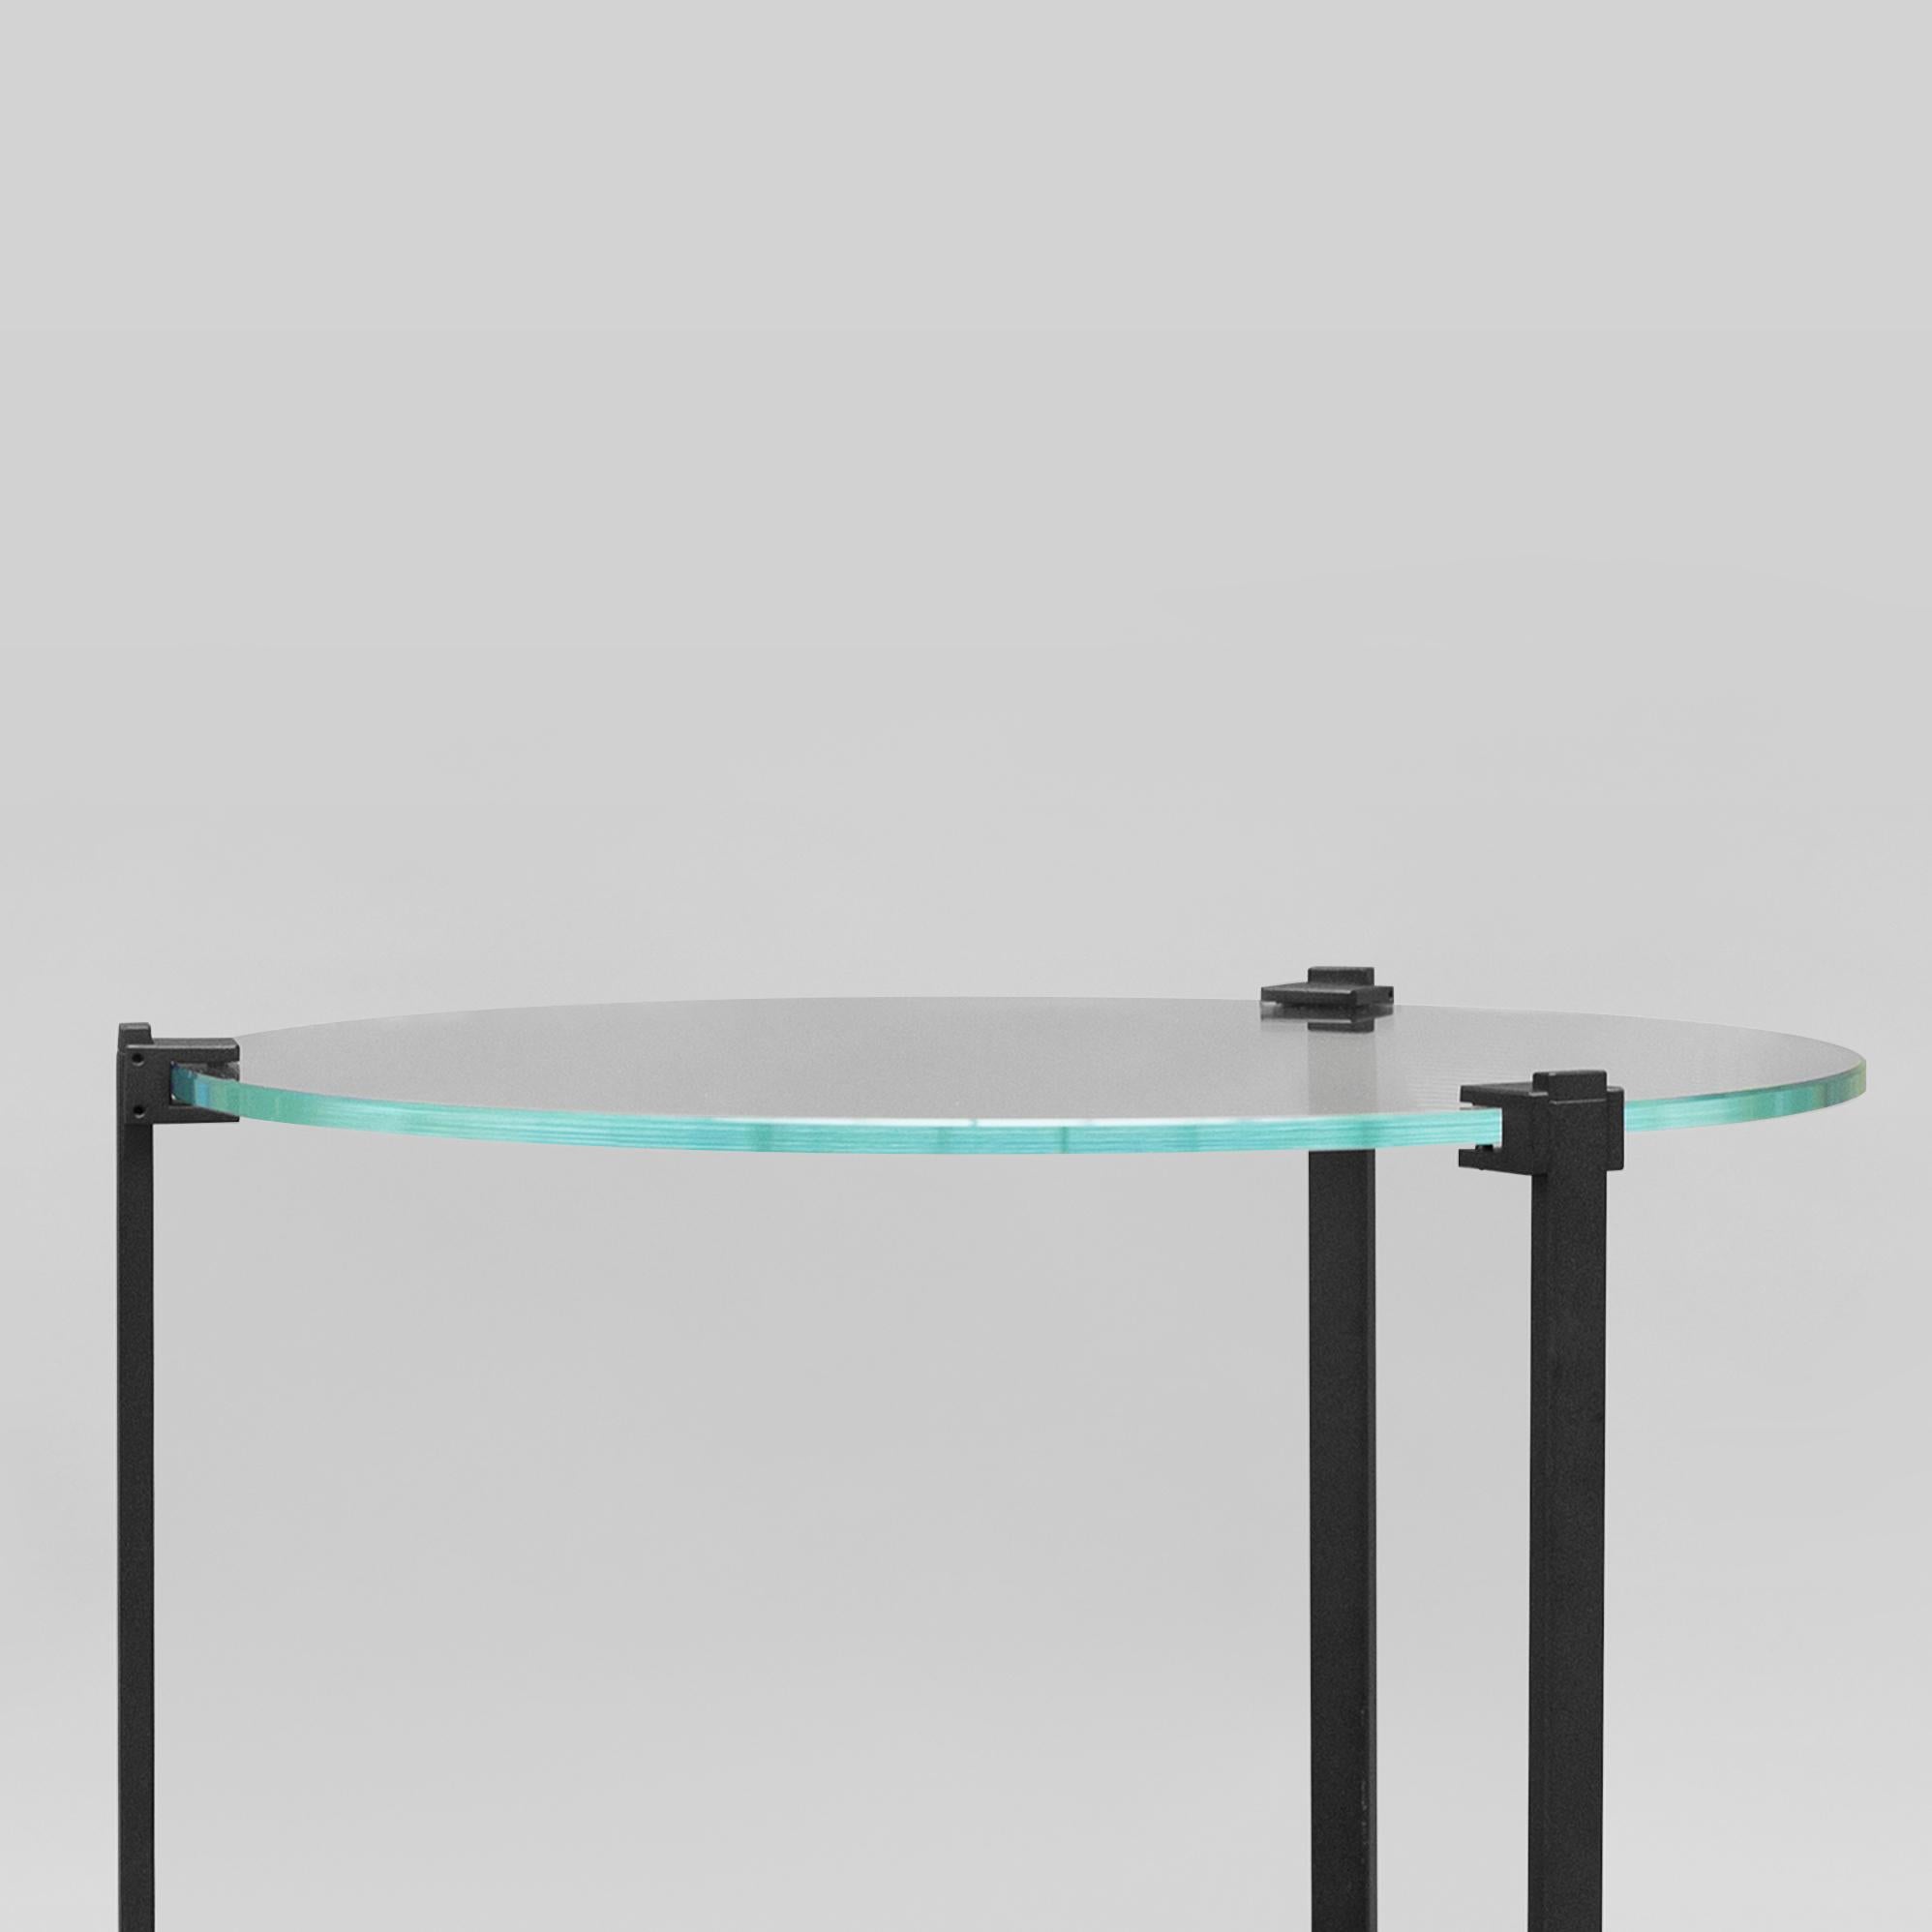 Contemporary side table designed by Peter Ghyczy.
Manufactured by Ghyczy, (Netherlands)

The T79 is versatile as it is modest. Three stainless steel legs are secured to the glass top by cast metal details. To be ordered in different heights and